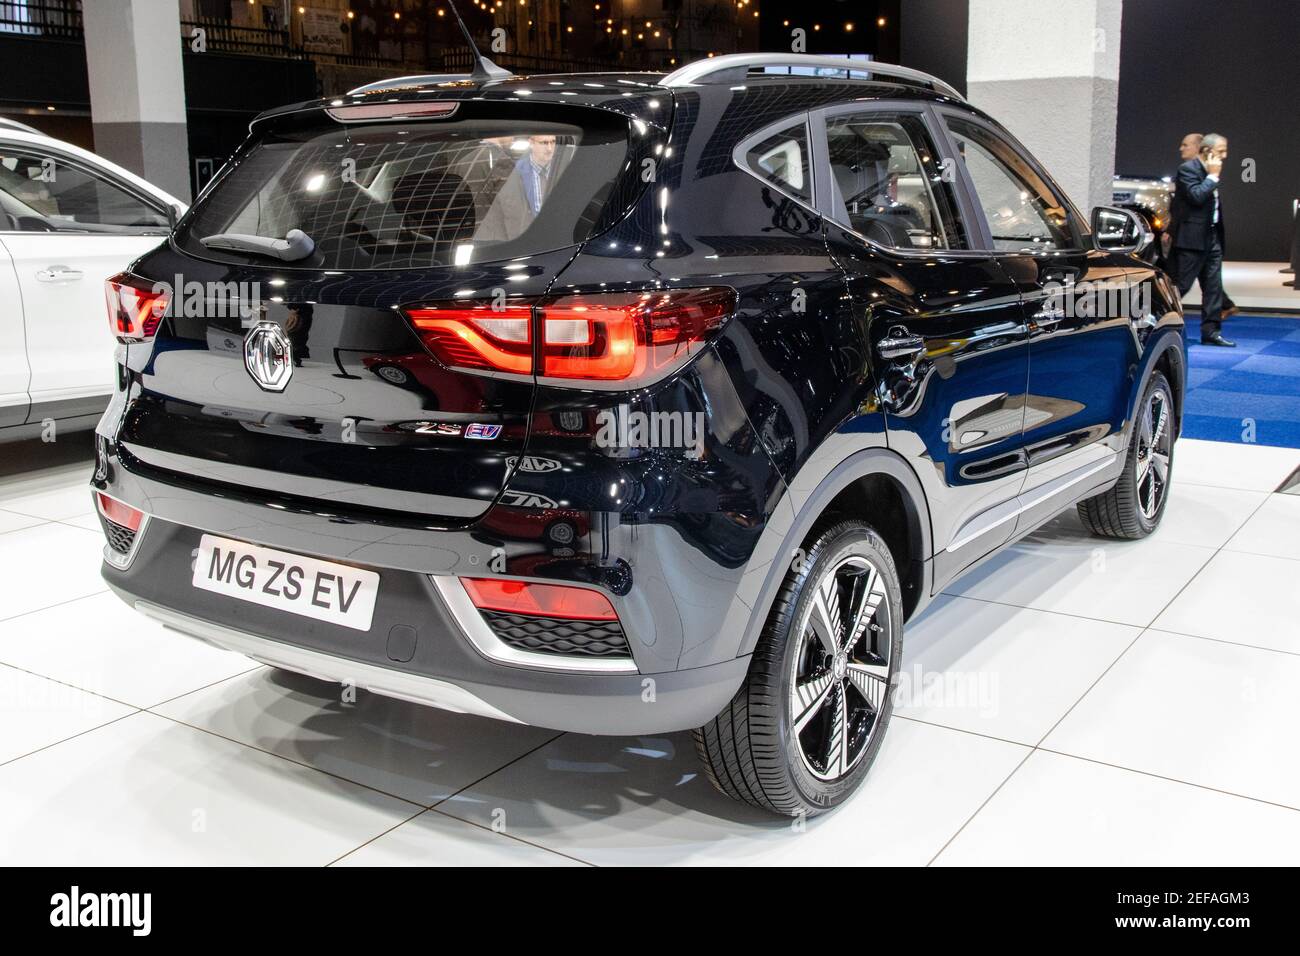 MG ZS EV electric SUV car at the Autosalon 2020. Brussels, Belgium -  January 9, 2020 Stock Photo - Alamy